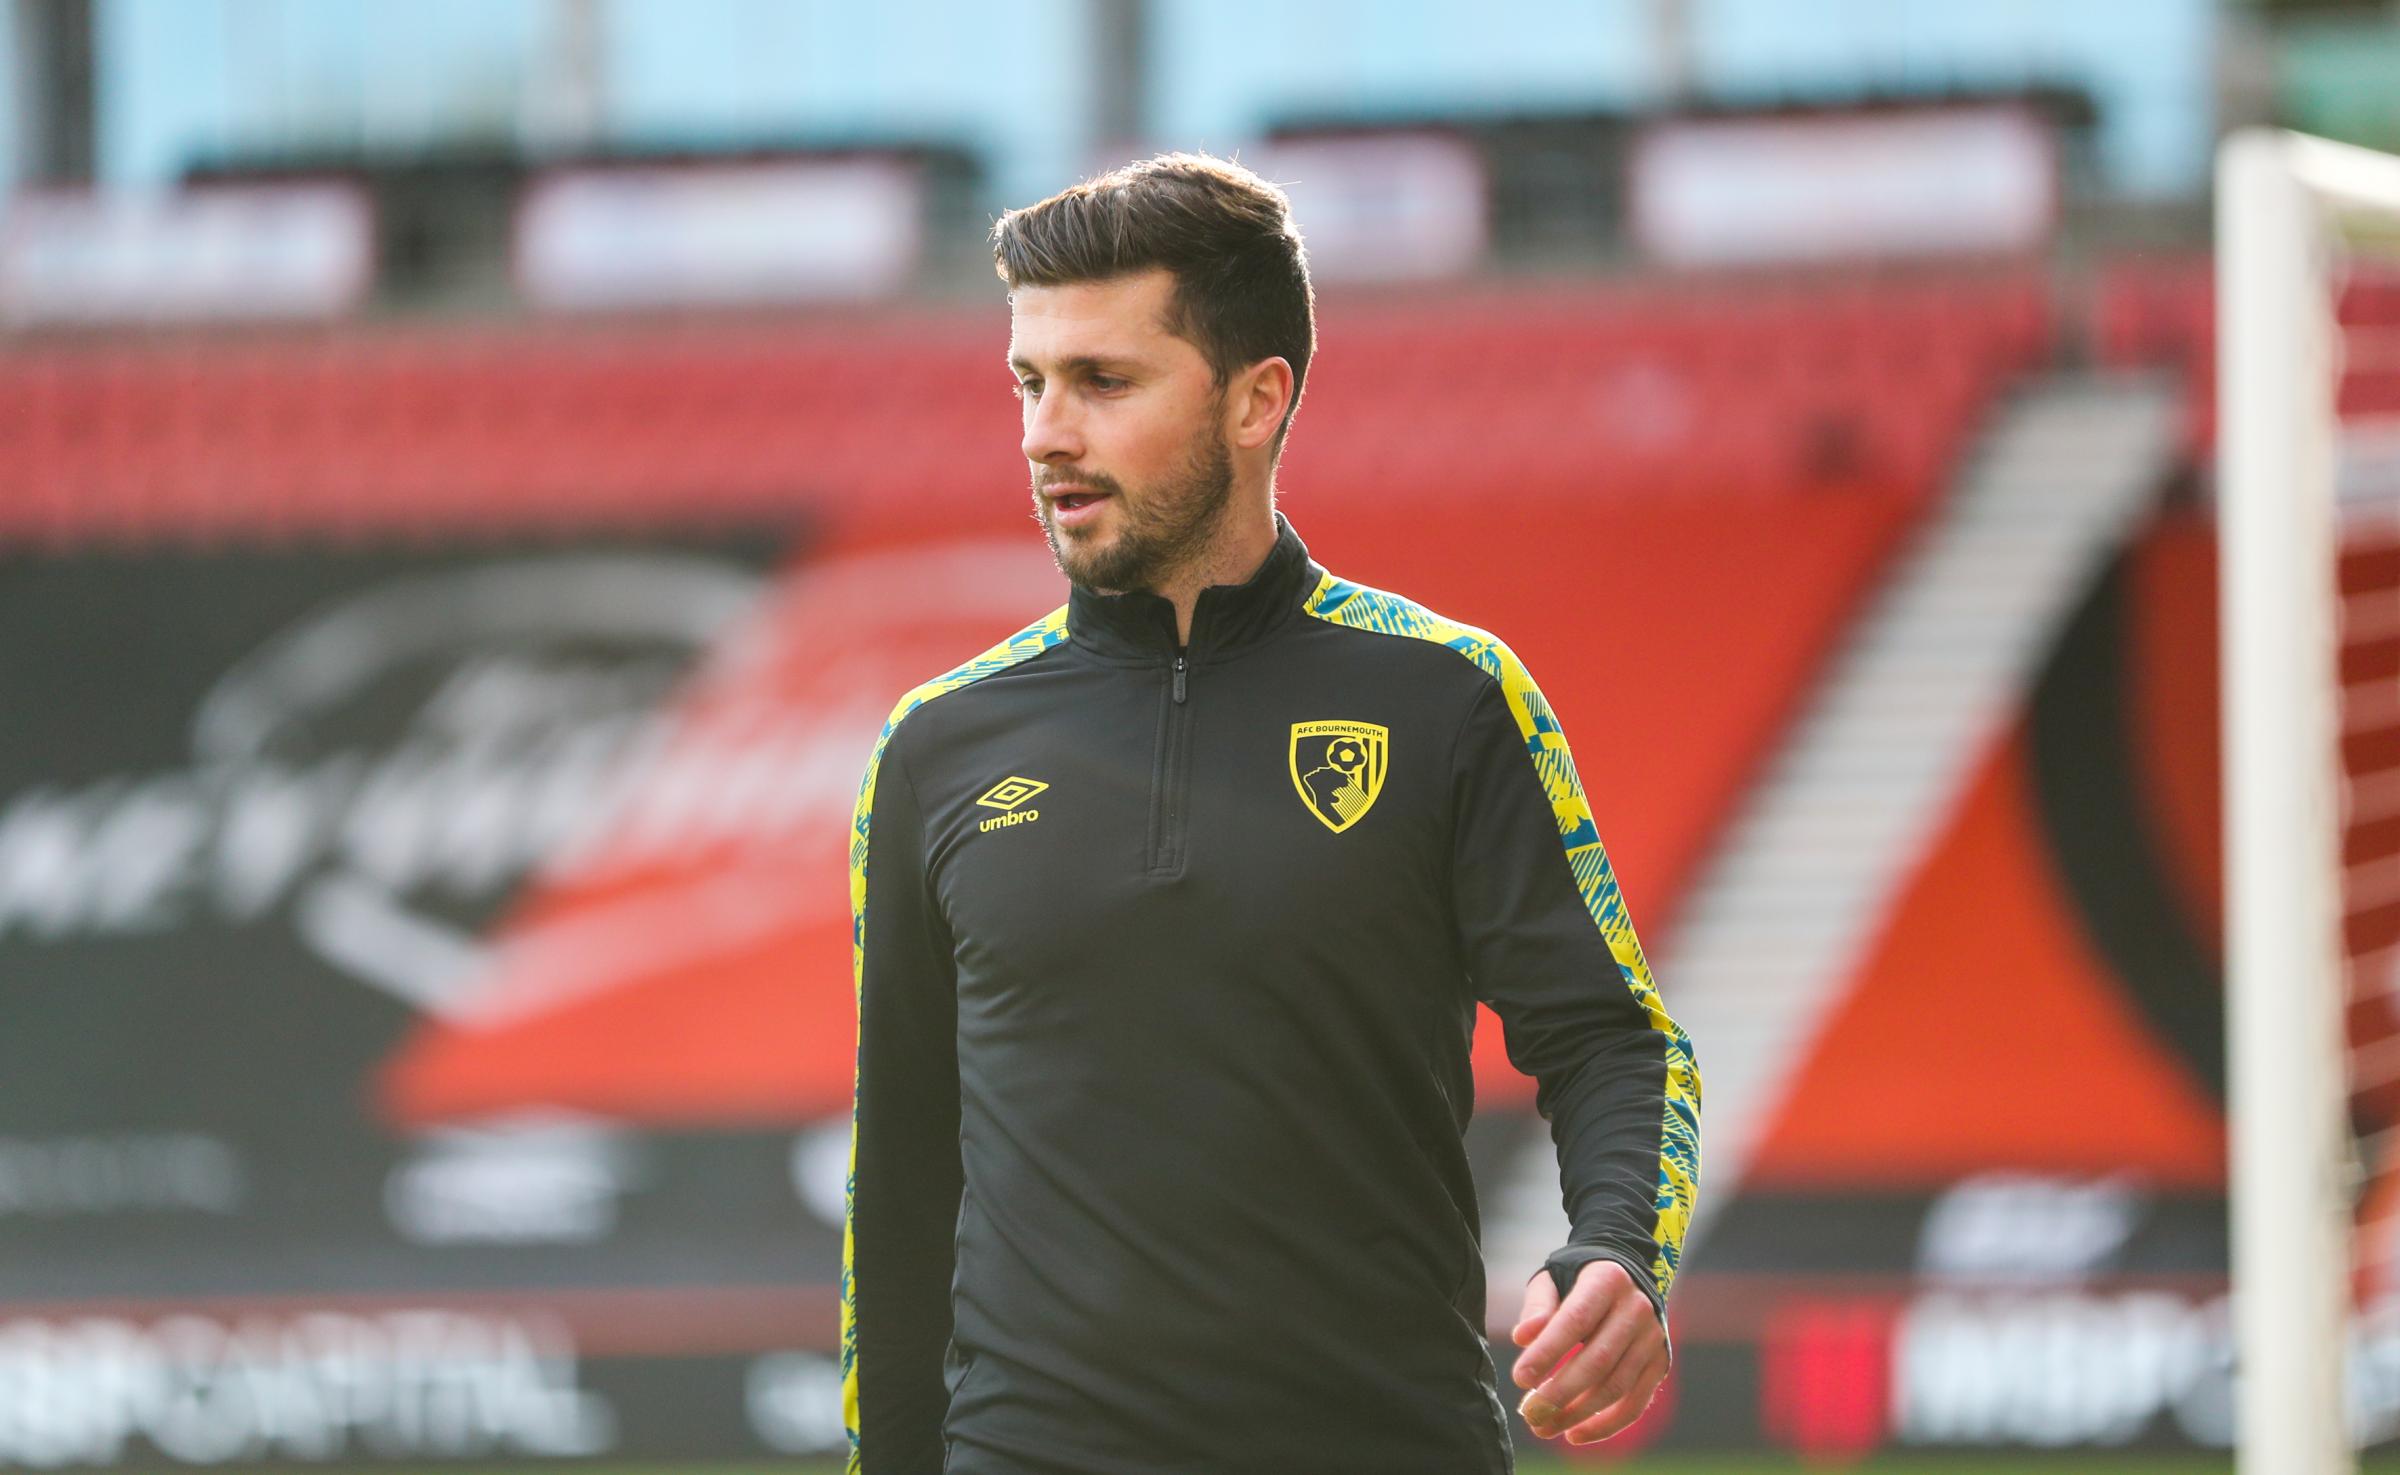 Shane Long: I respect Saints as much as they respect me